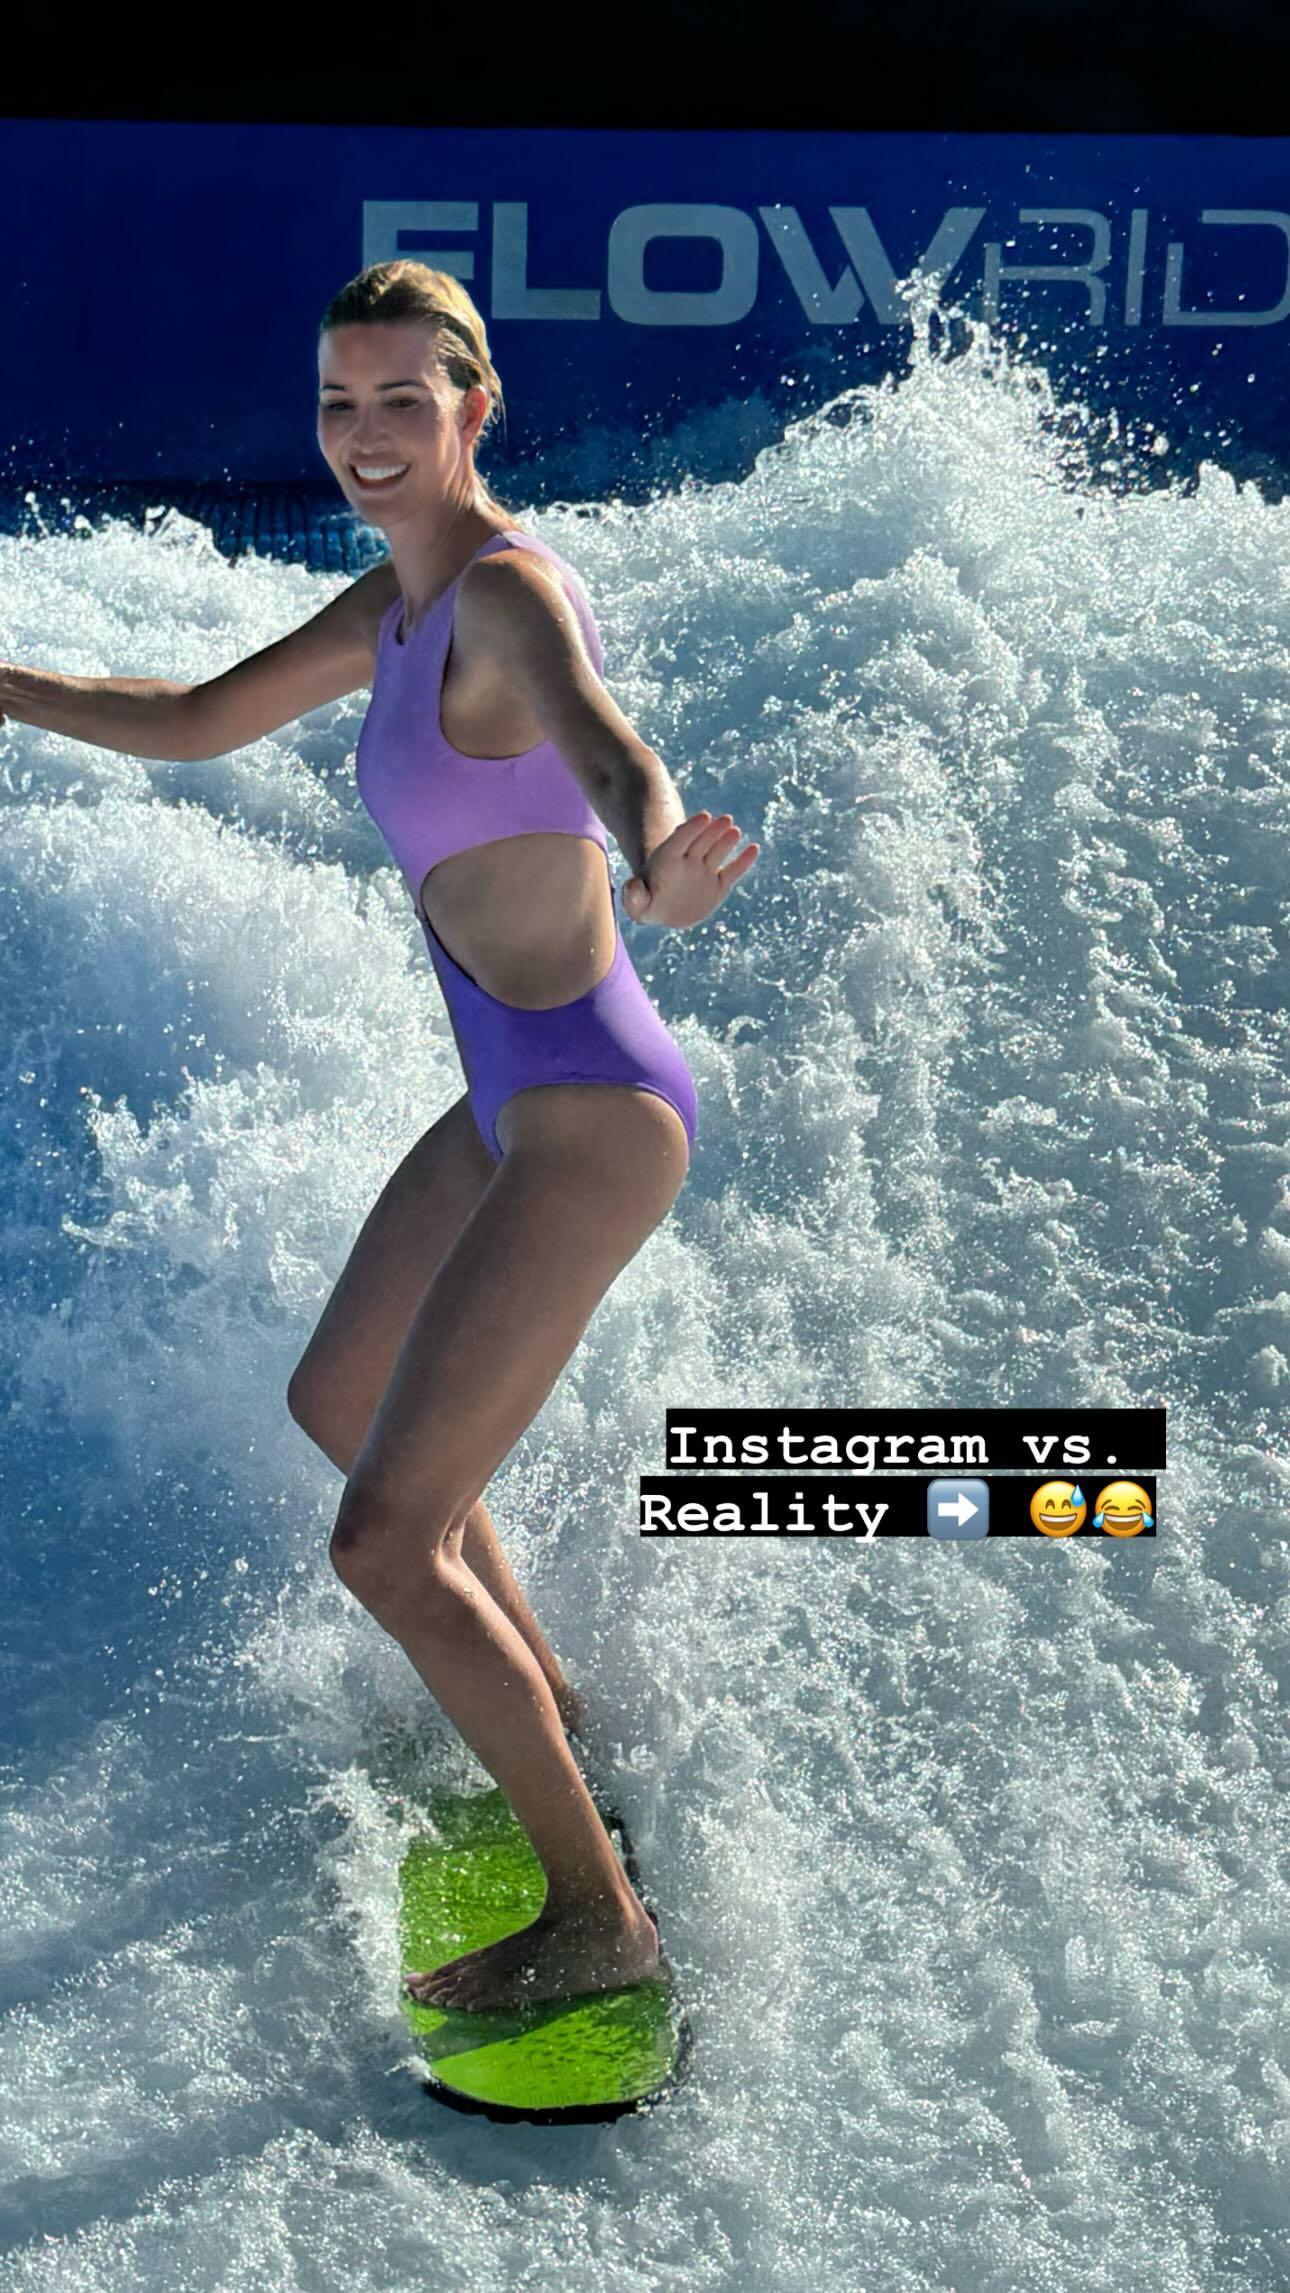 Ivanka Trump Suffers Wipeout While Surfing In Stunning Purple One-Piece